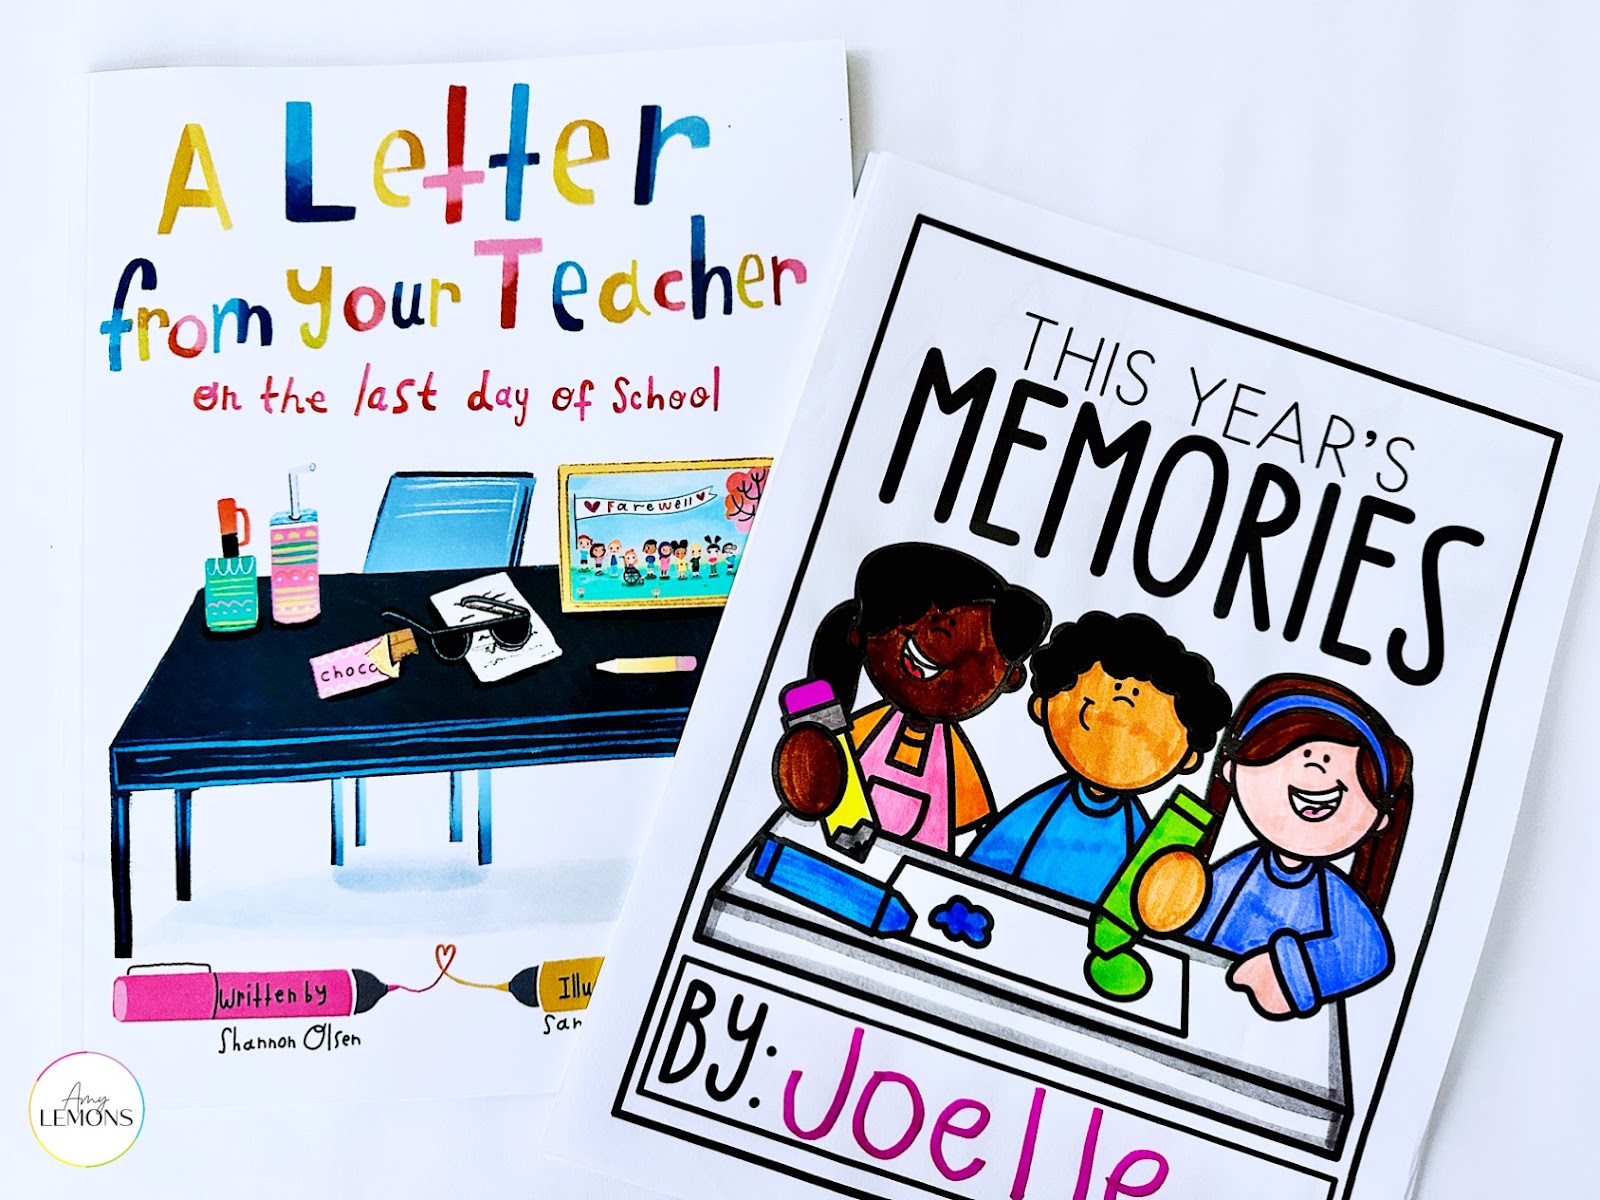 A Letter From Your Teacher book and Memory book activity for the end of the year